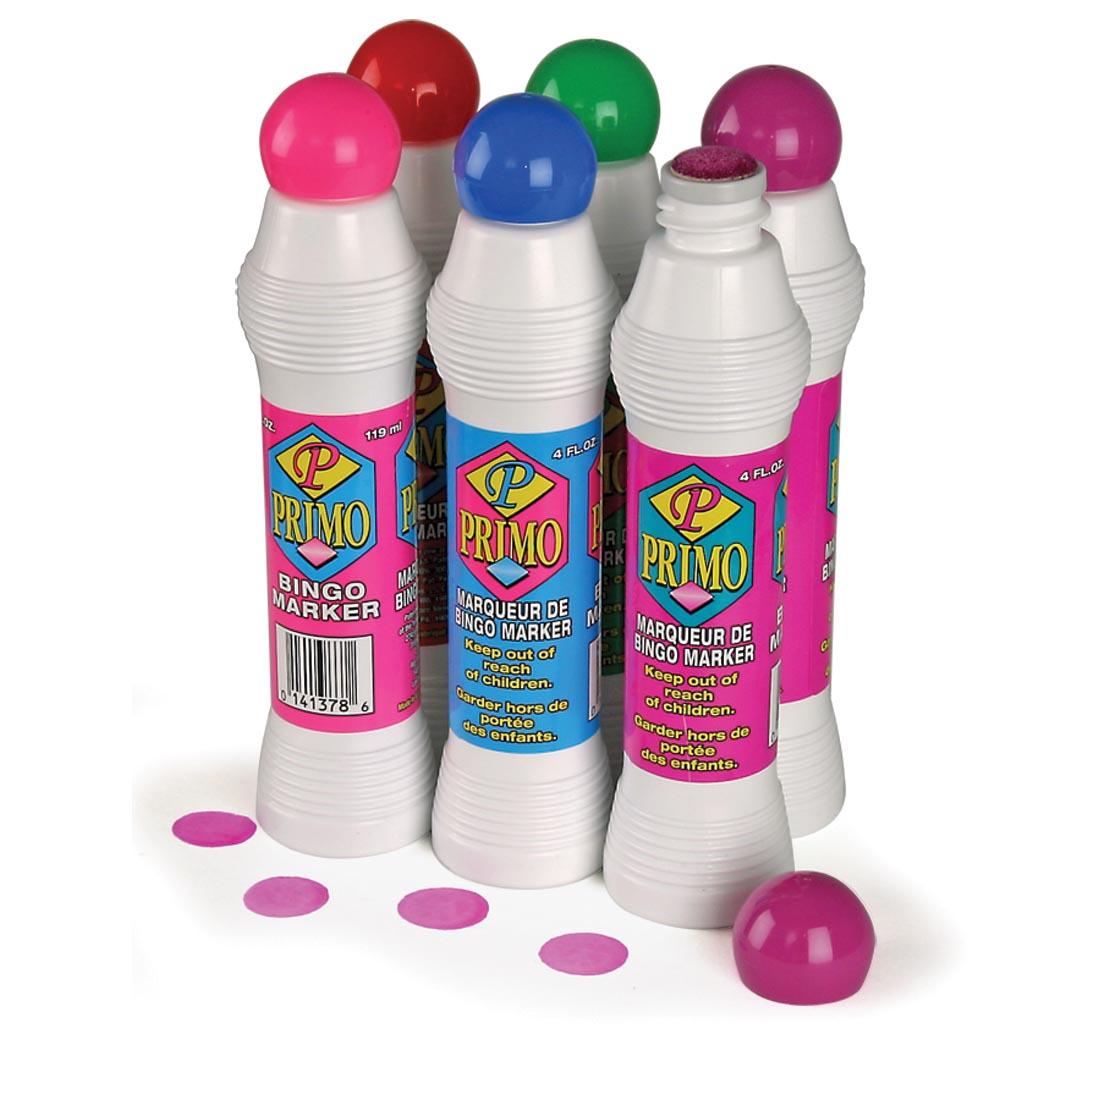 Six Primo Bingo Markers; one with lid off